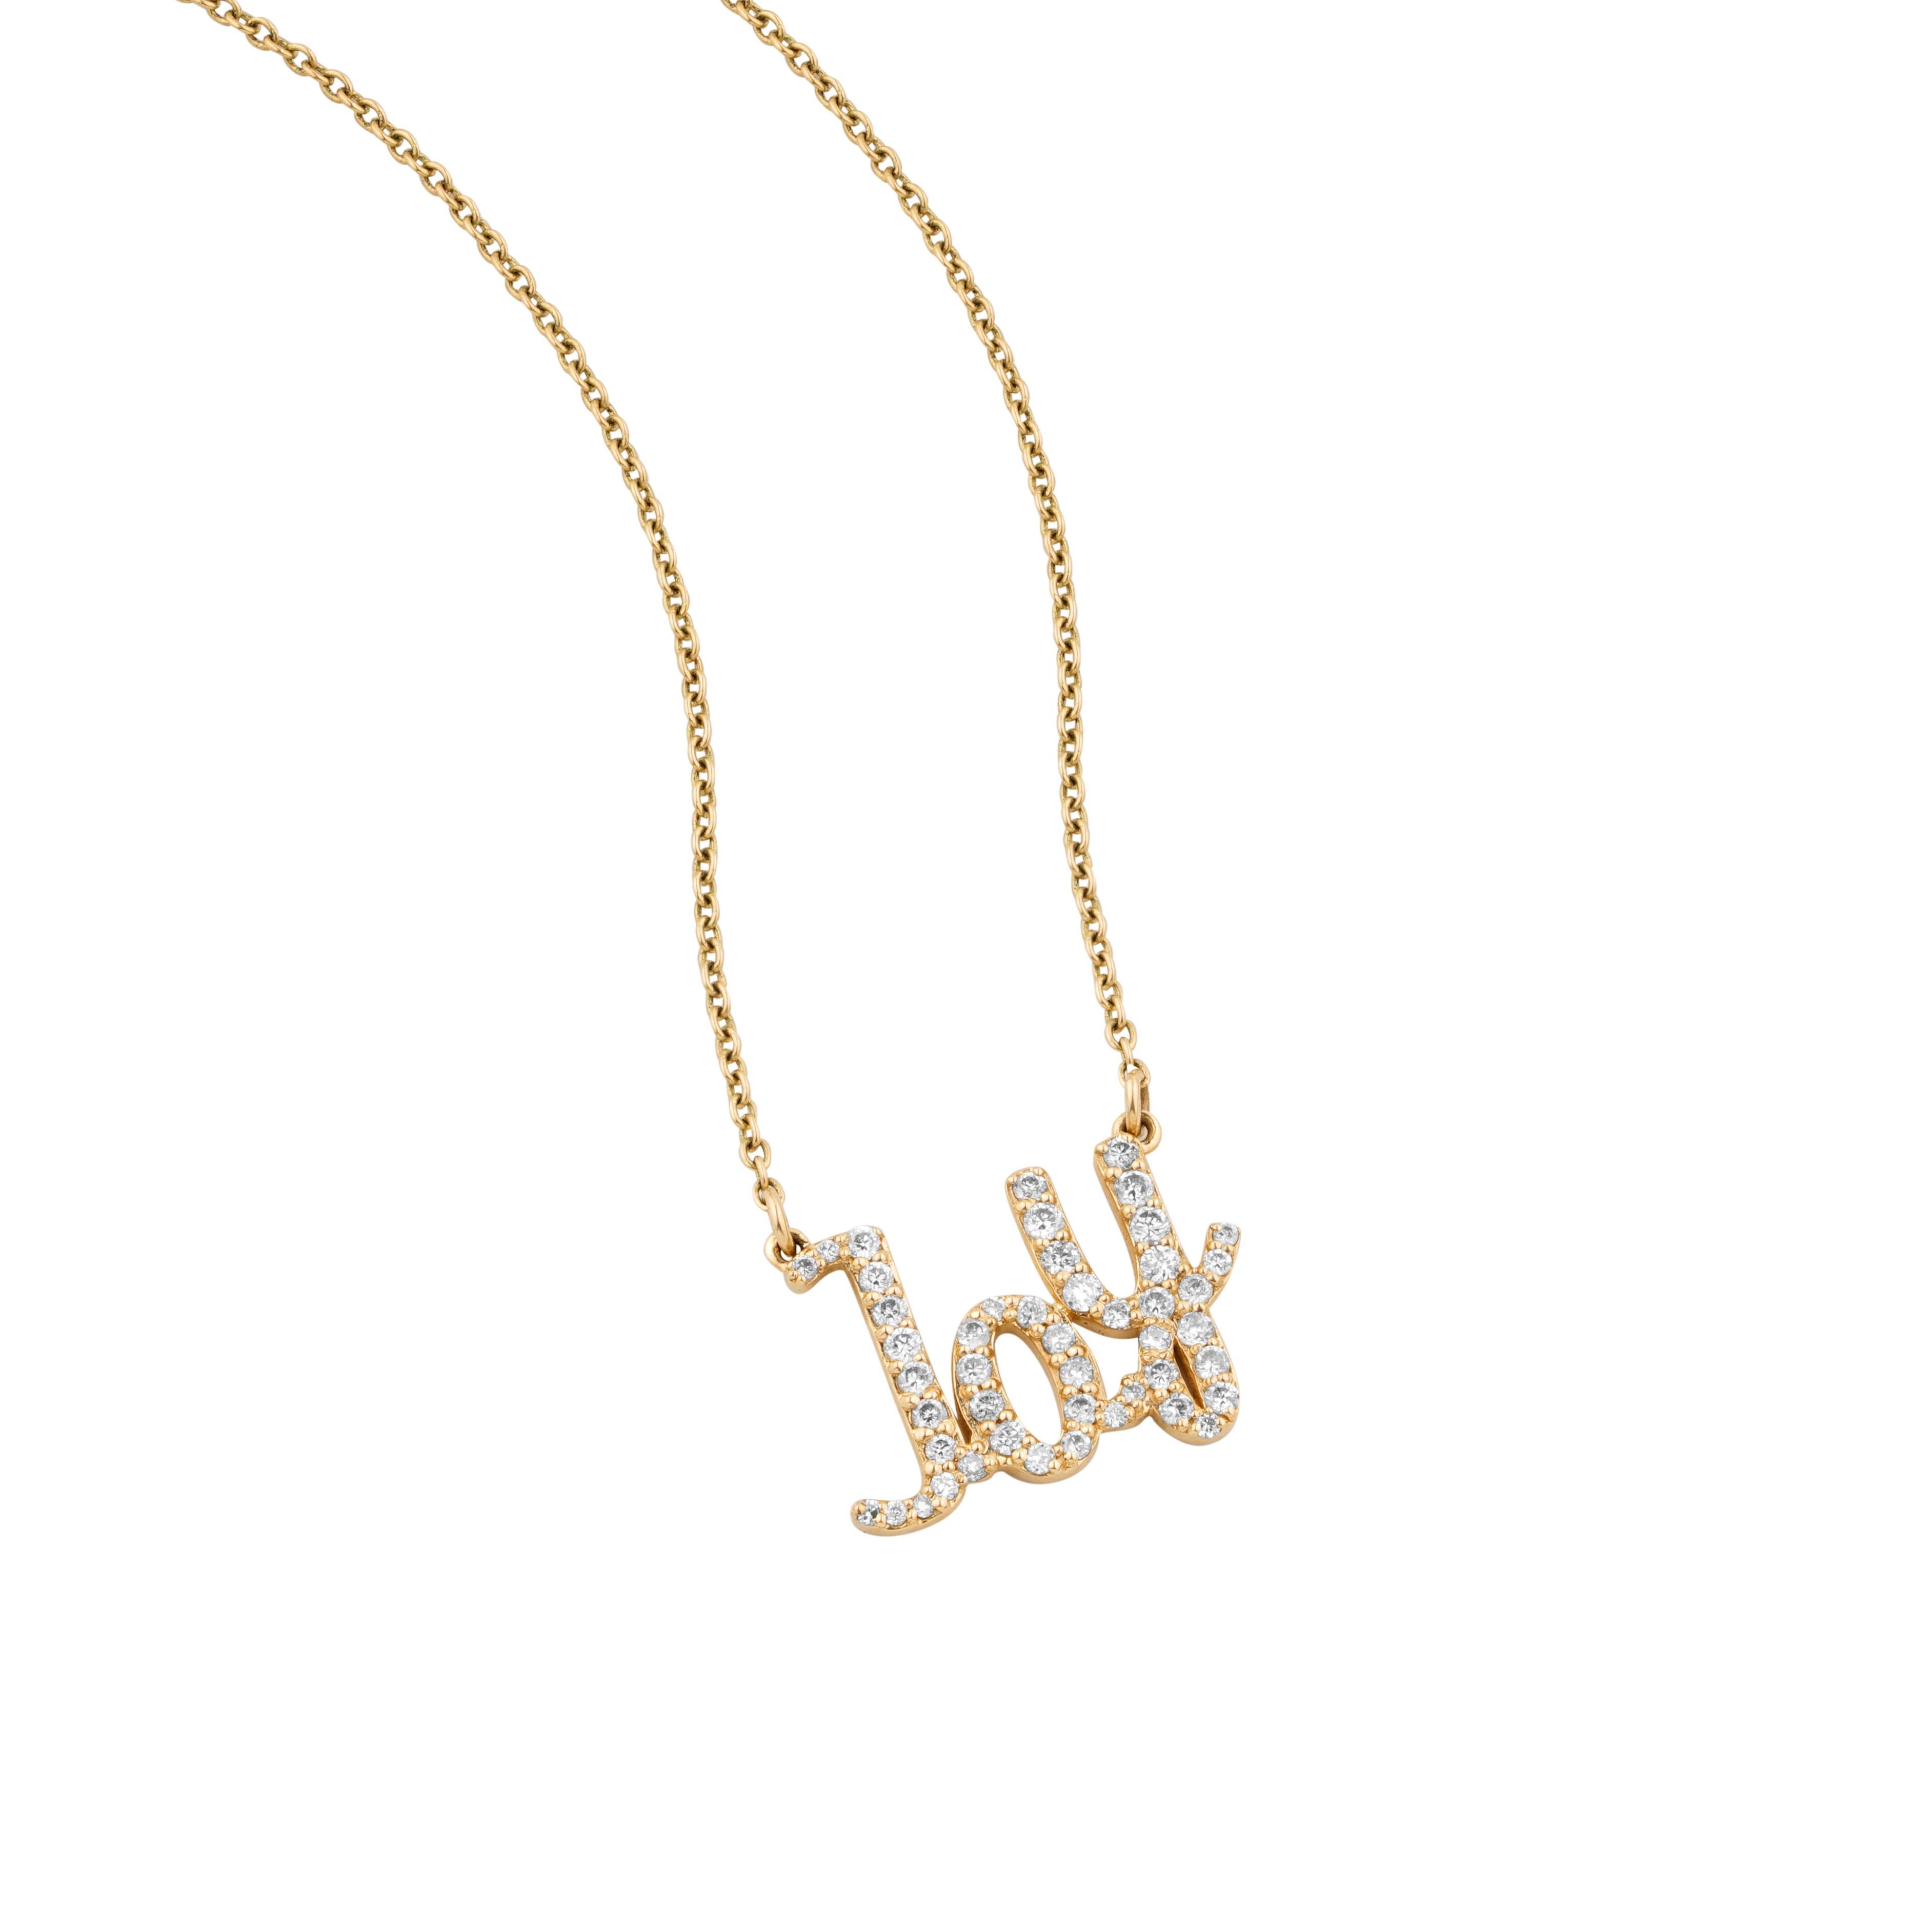 The Diamond Joy Pendant Necklace is a radiant addition to any jewellery collection. Crafted in warm gold with scattered diamonds, it sparkles from every angle. This piece is not just a fashion statement but a celebration of life's joyful moments. It